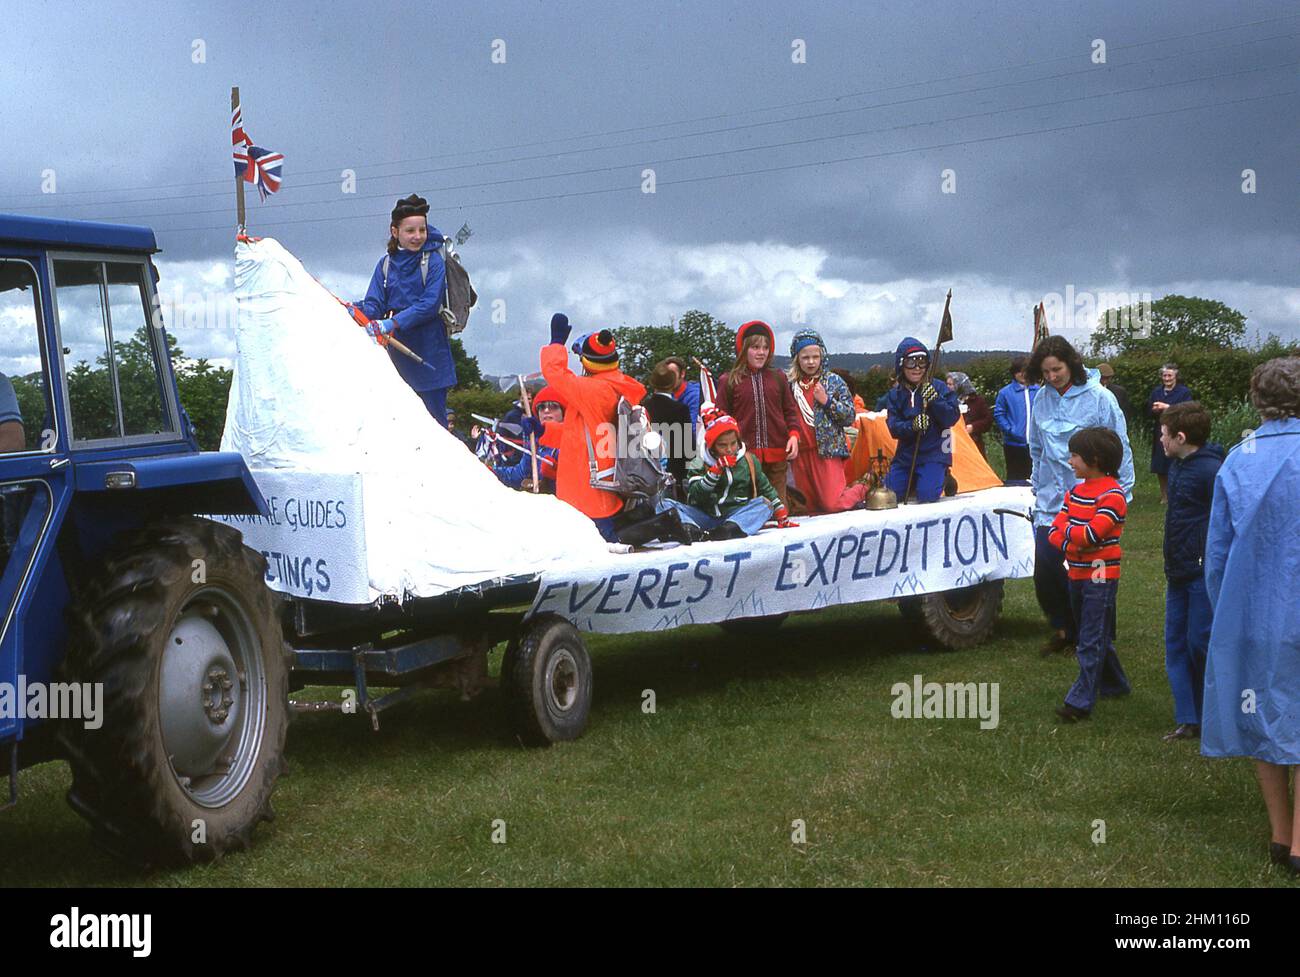 1977, historical, on the back of a tractor, brownies and girl guides in outdoor gear on a decorated parade float commerating the Everest Expedition of the same year, taking part in a village carnival to celebrate the silver jubilee of Her Majesty, Queen Elizabeth II, England, UK. Stock Photo